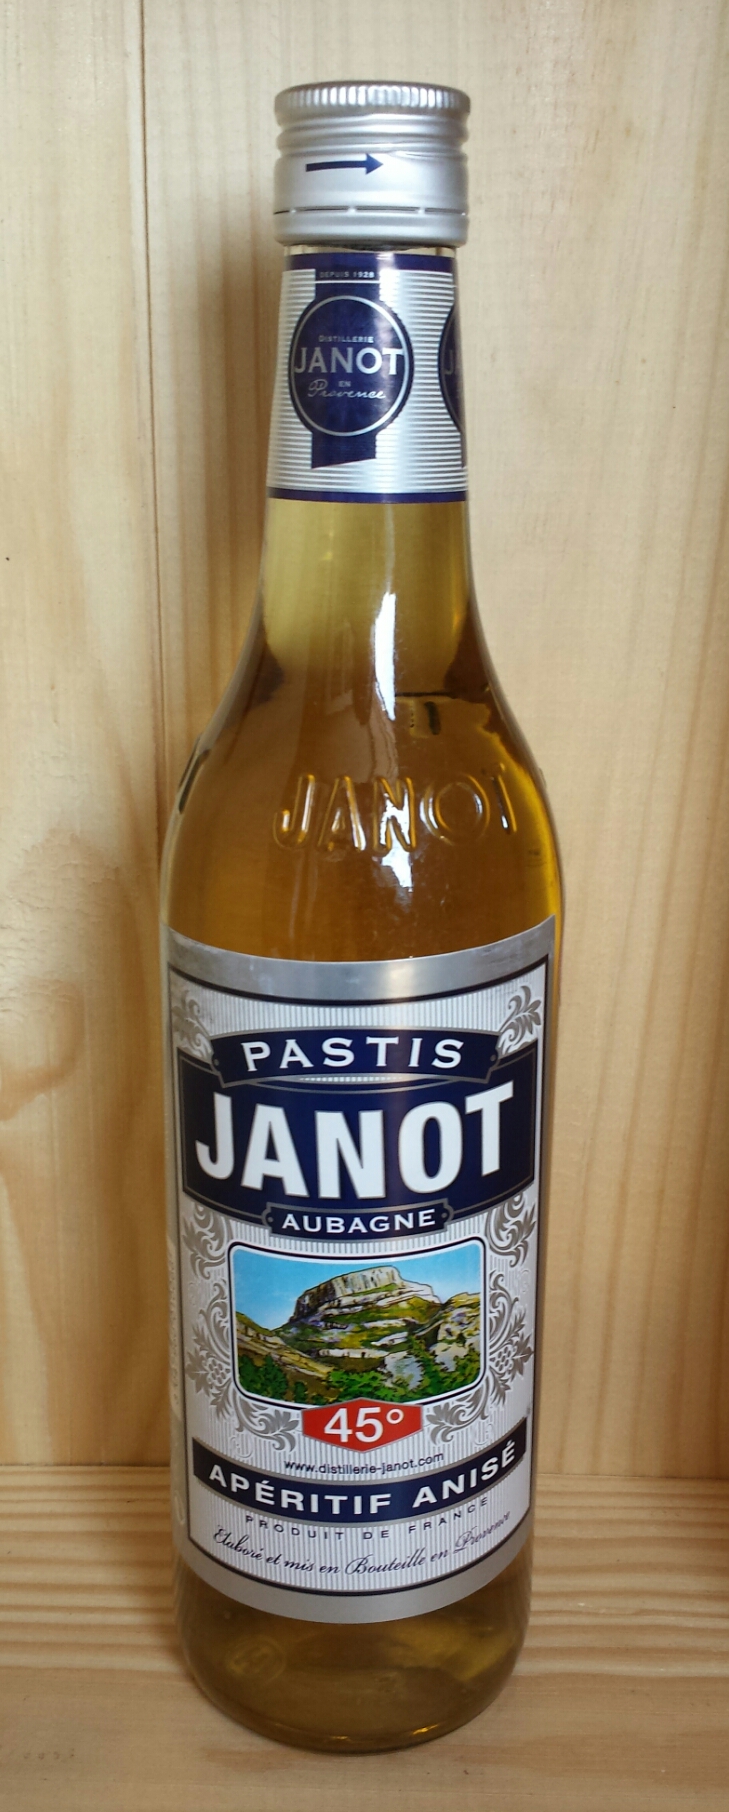 a bottle of jaanijot on a wooden surface